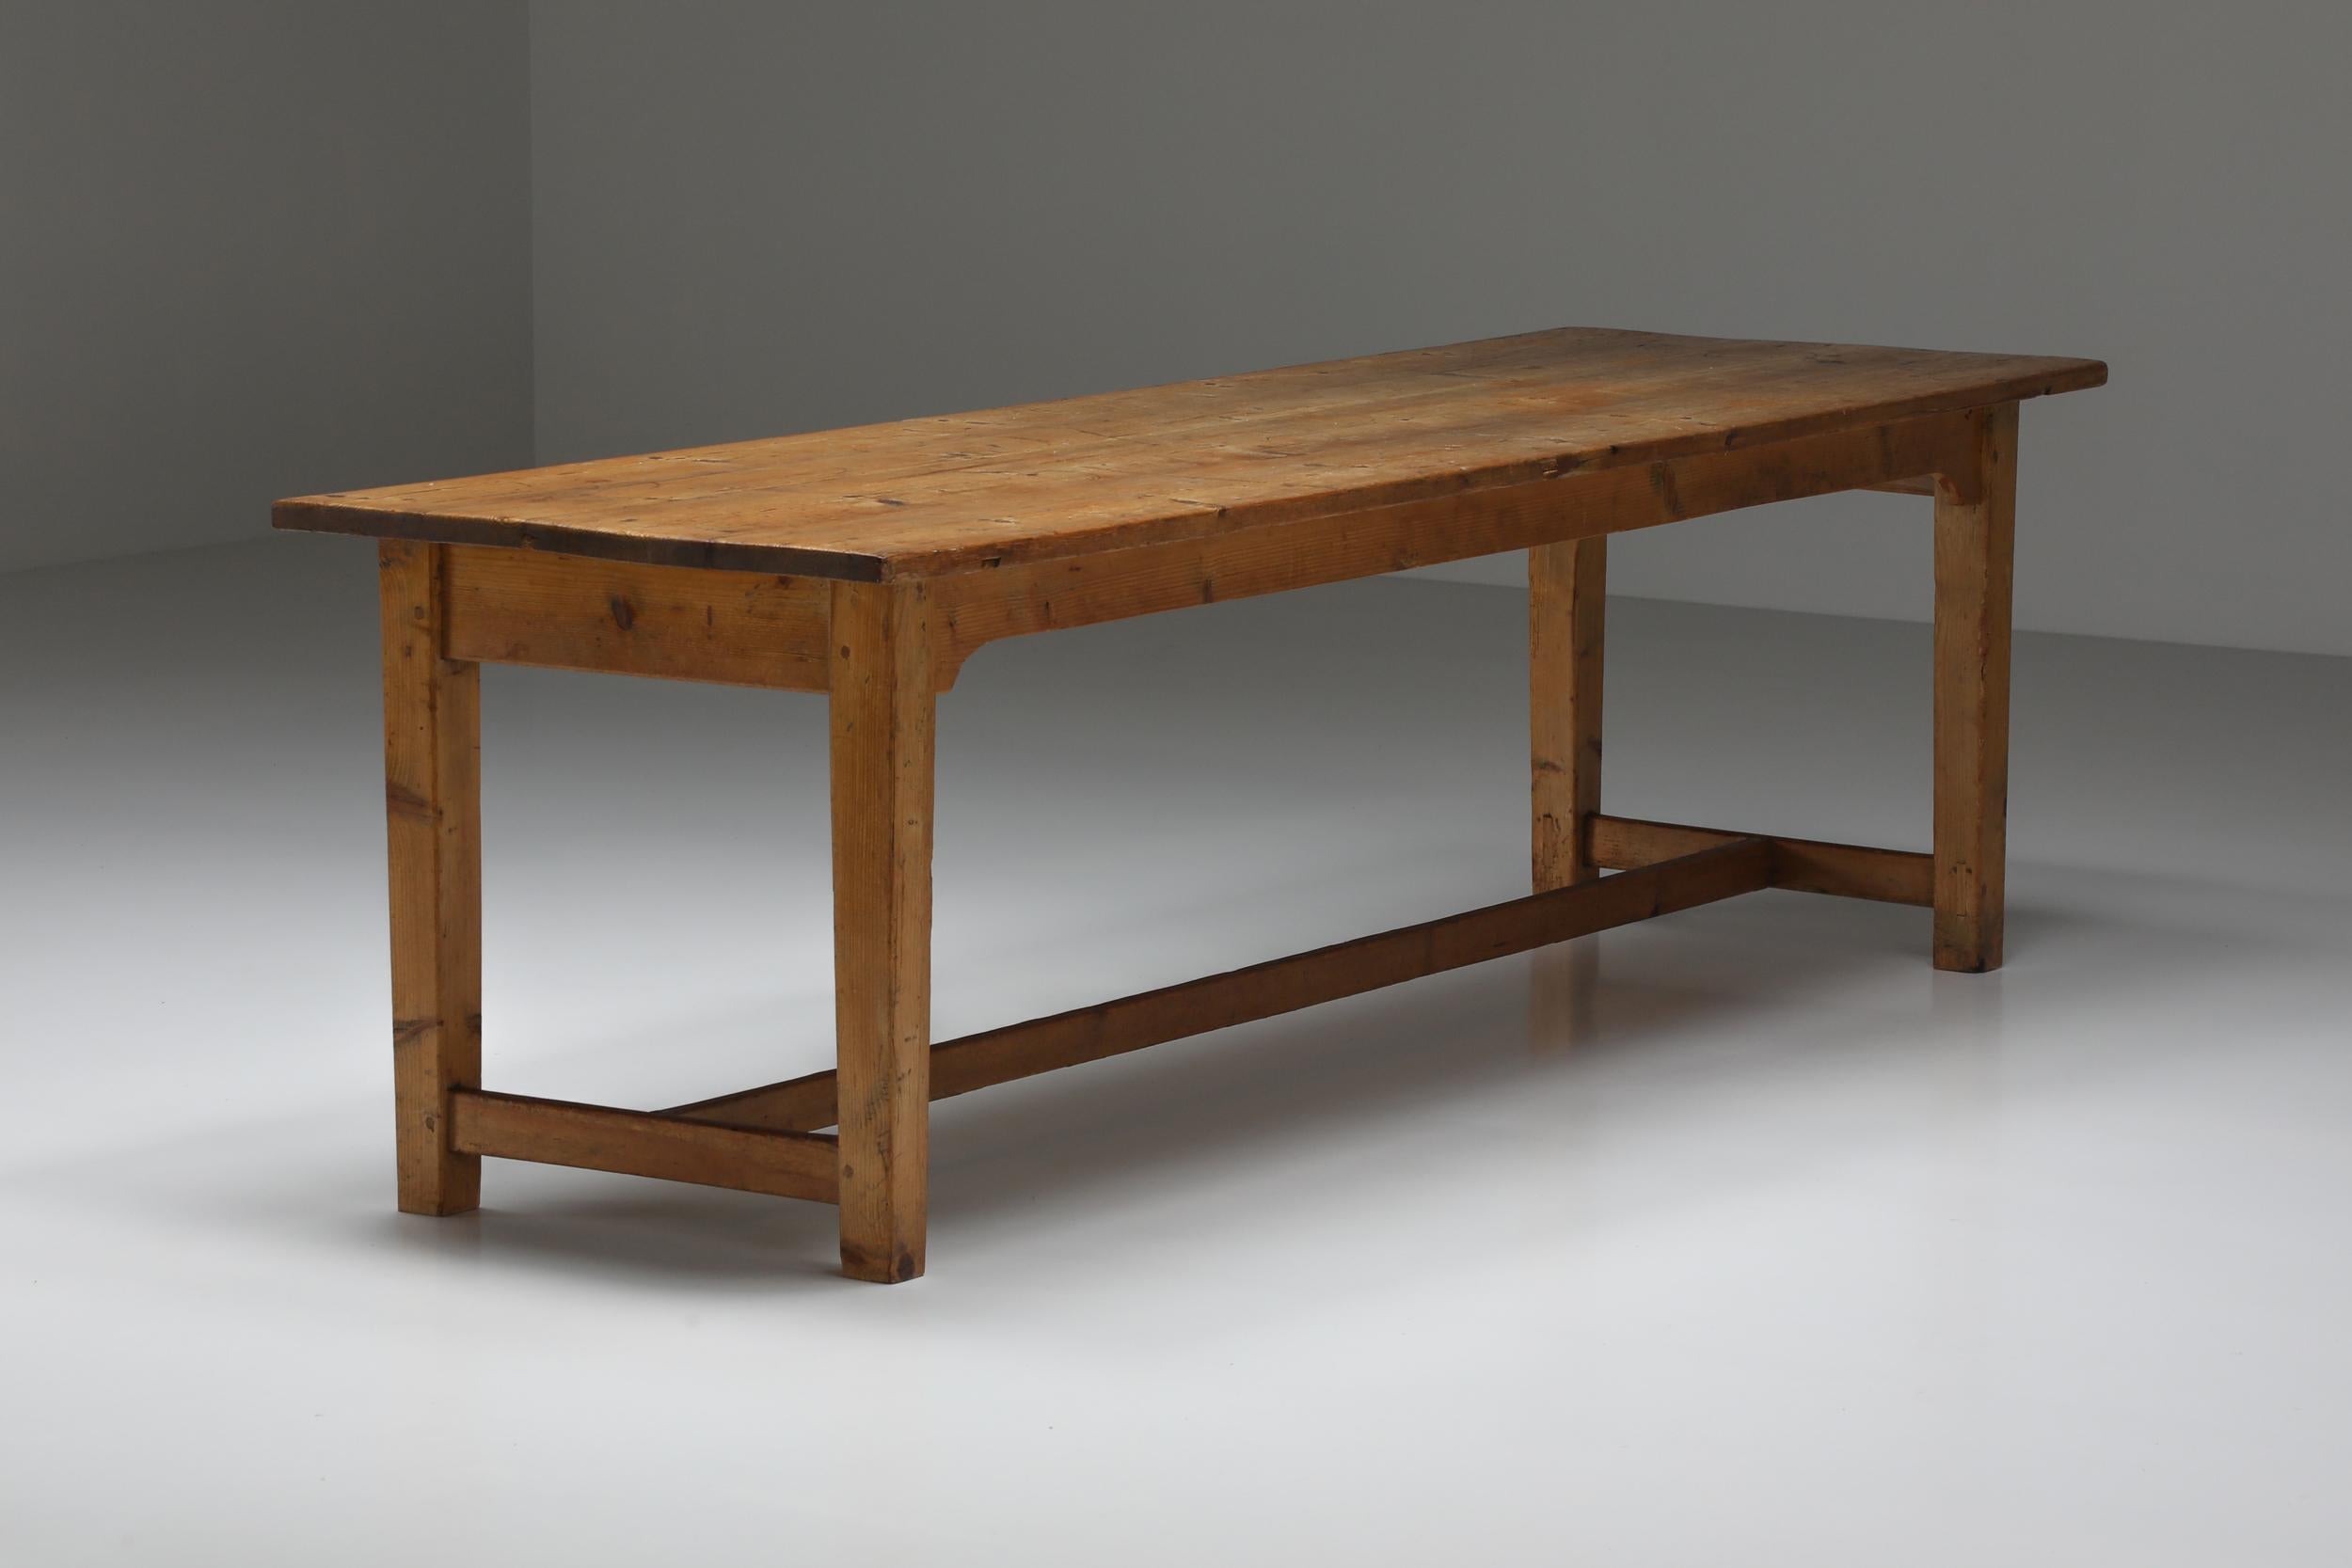 Wood Rustic Extra Large Dining Table, Farm Table, Mid-Century Modern, Italy, 1950's